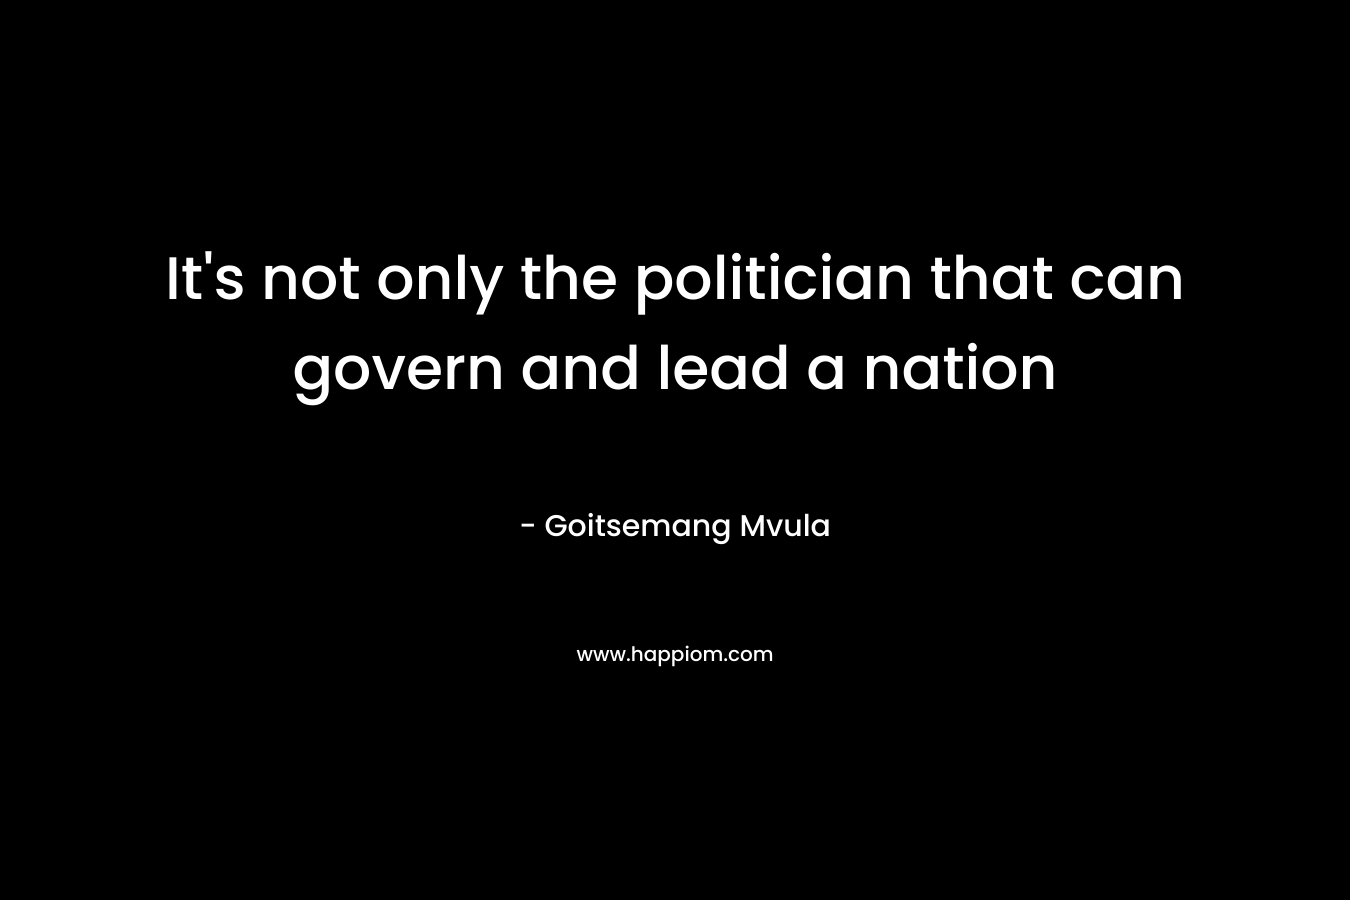 It's not only the politician that can govern and lead a nation